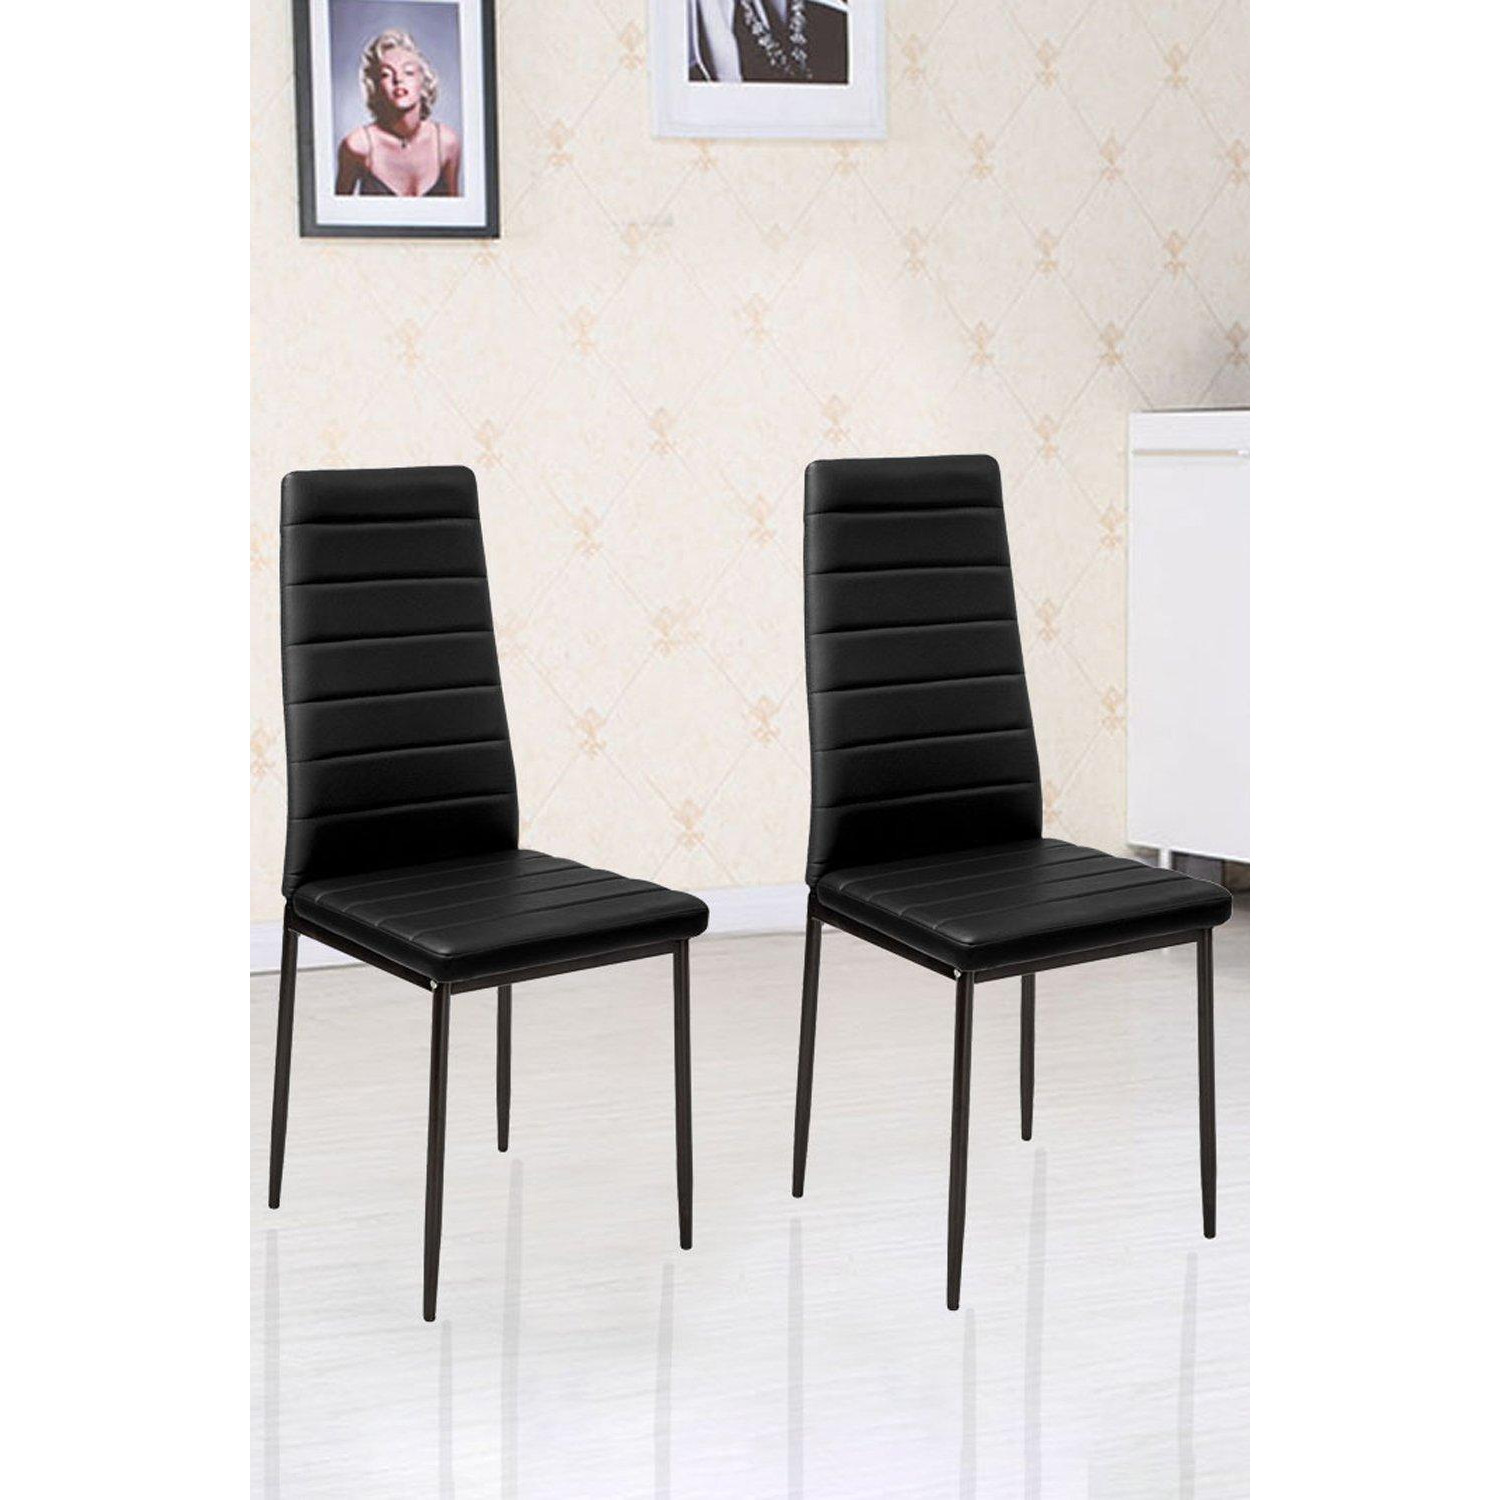 2pcs Armless High Back Dining Chairs - image 1